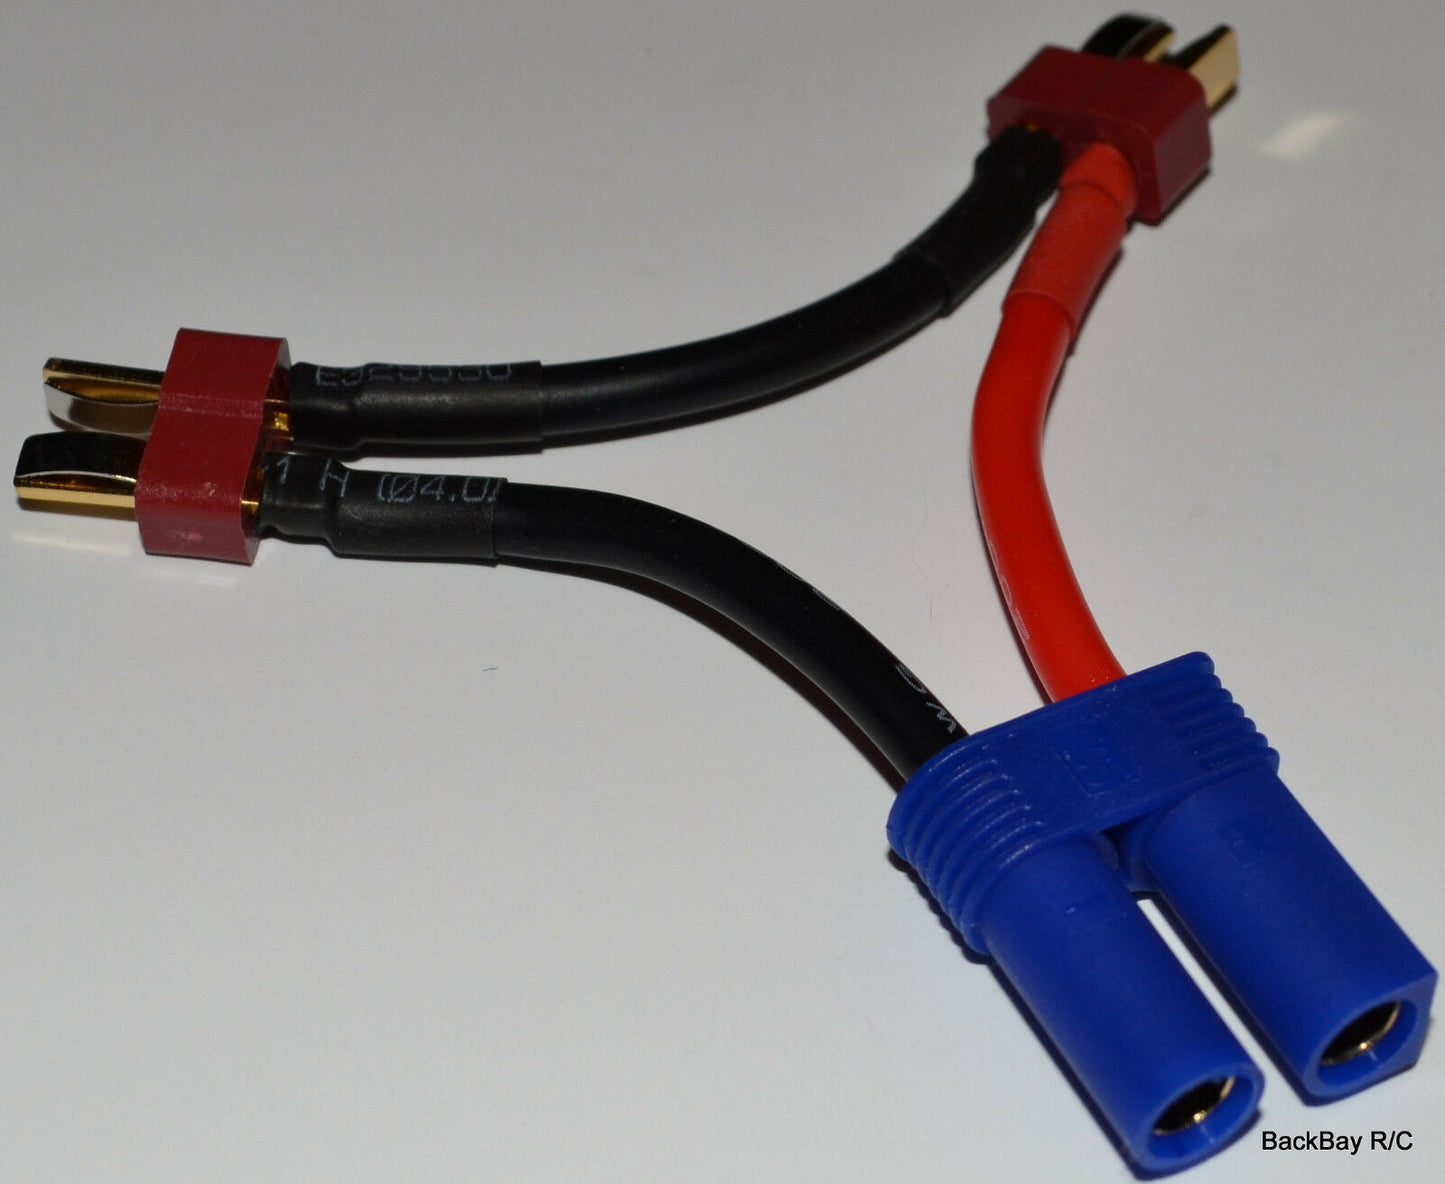 (2) T-Plug (Deans Style) Male / (1) EC5 Female - Series Adapter with 12awg Wire